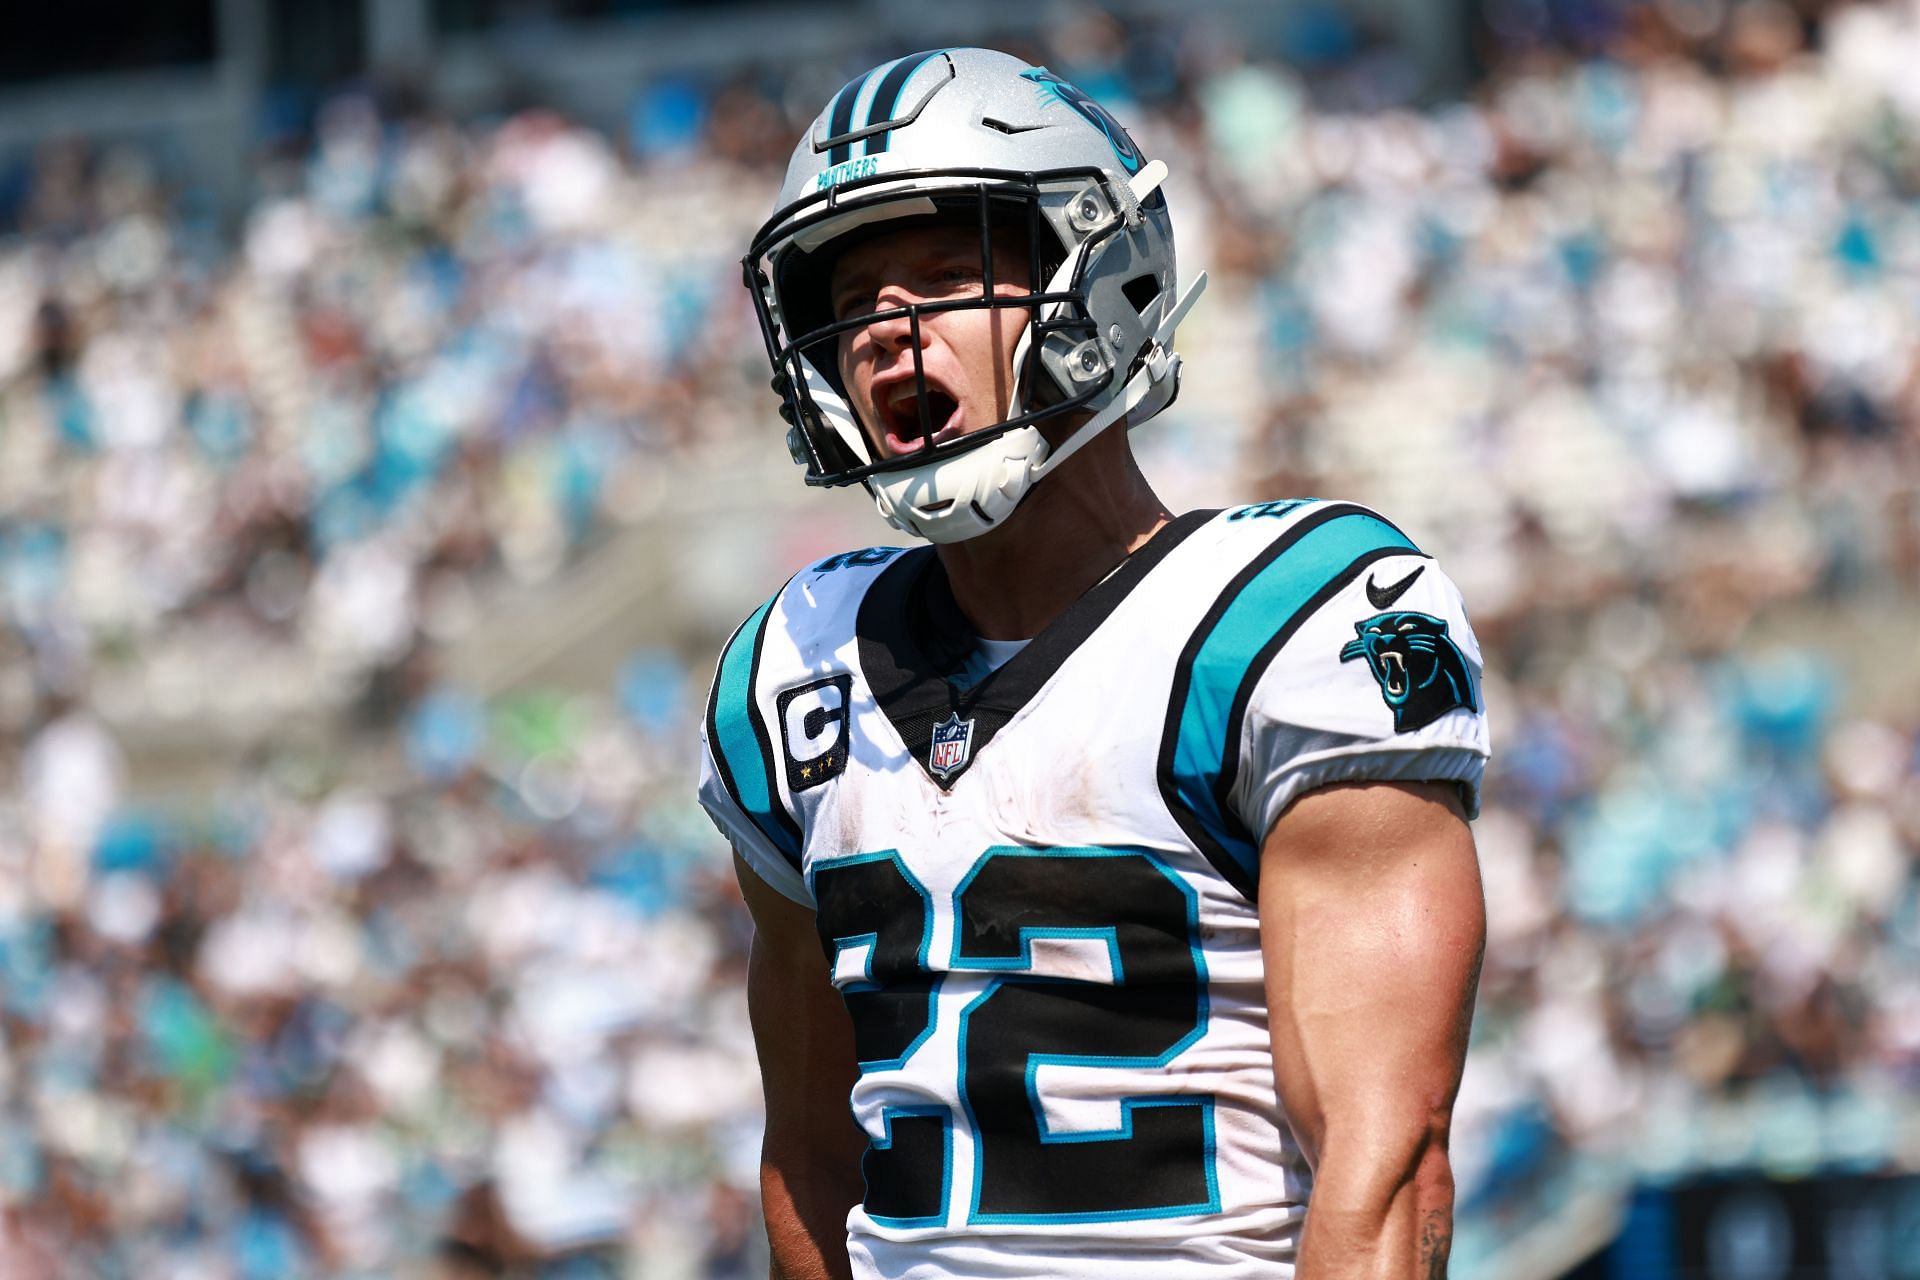 Christian McCaffrey needs to have a bounce-back year in 2022 NFL